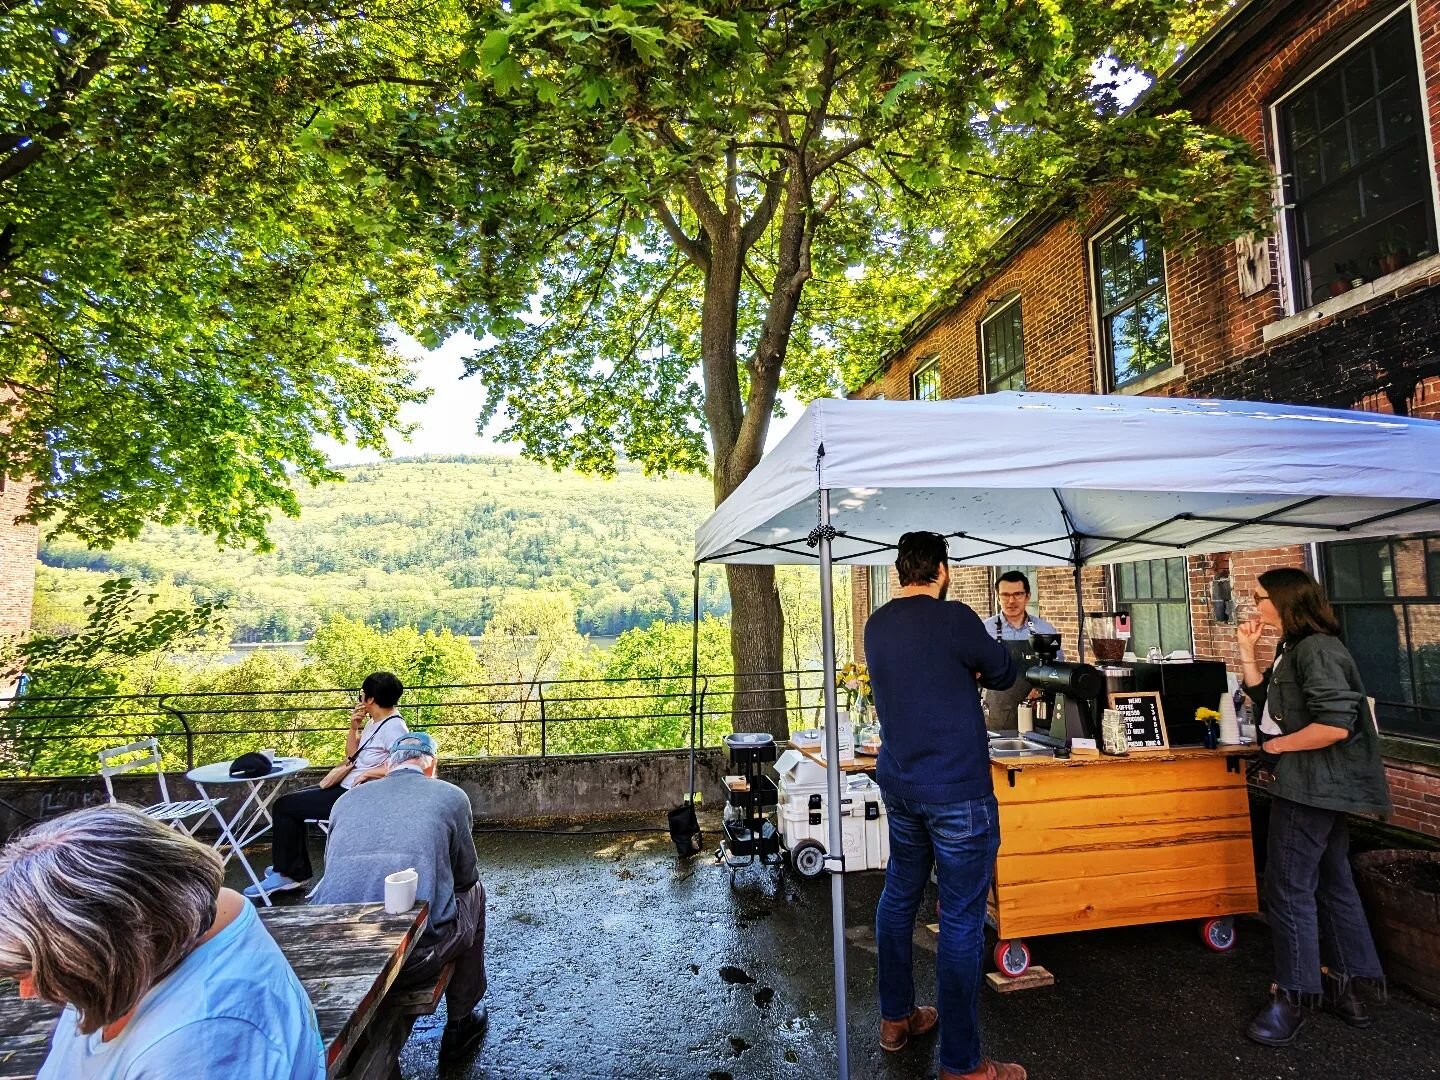 Bellwether: Fueled by Patio Coffee!

@patiocoffeevt is a pretty incredible place! Amazing coffee, stunning views and wonderful company! If you find yourself in Brattleboro be sure to check out Patio Coffee. They are open Weds-Sat 9am-3pm ❤️